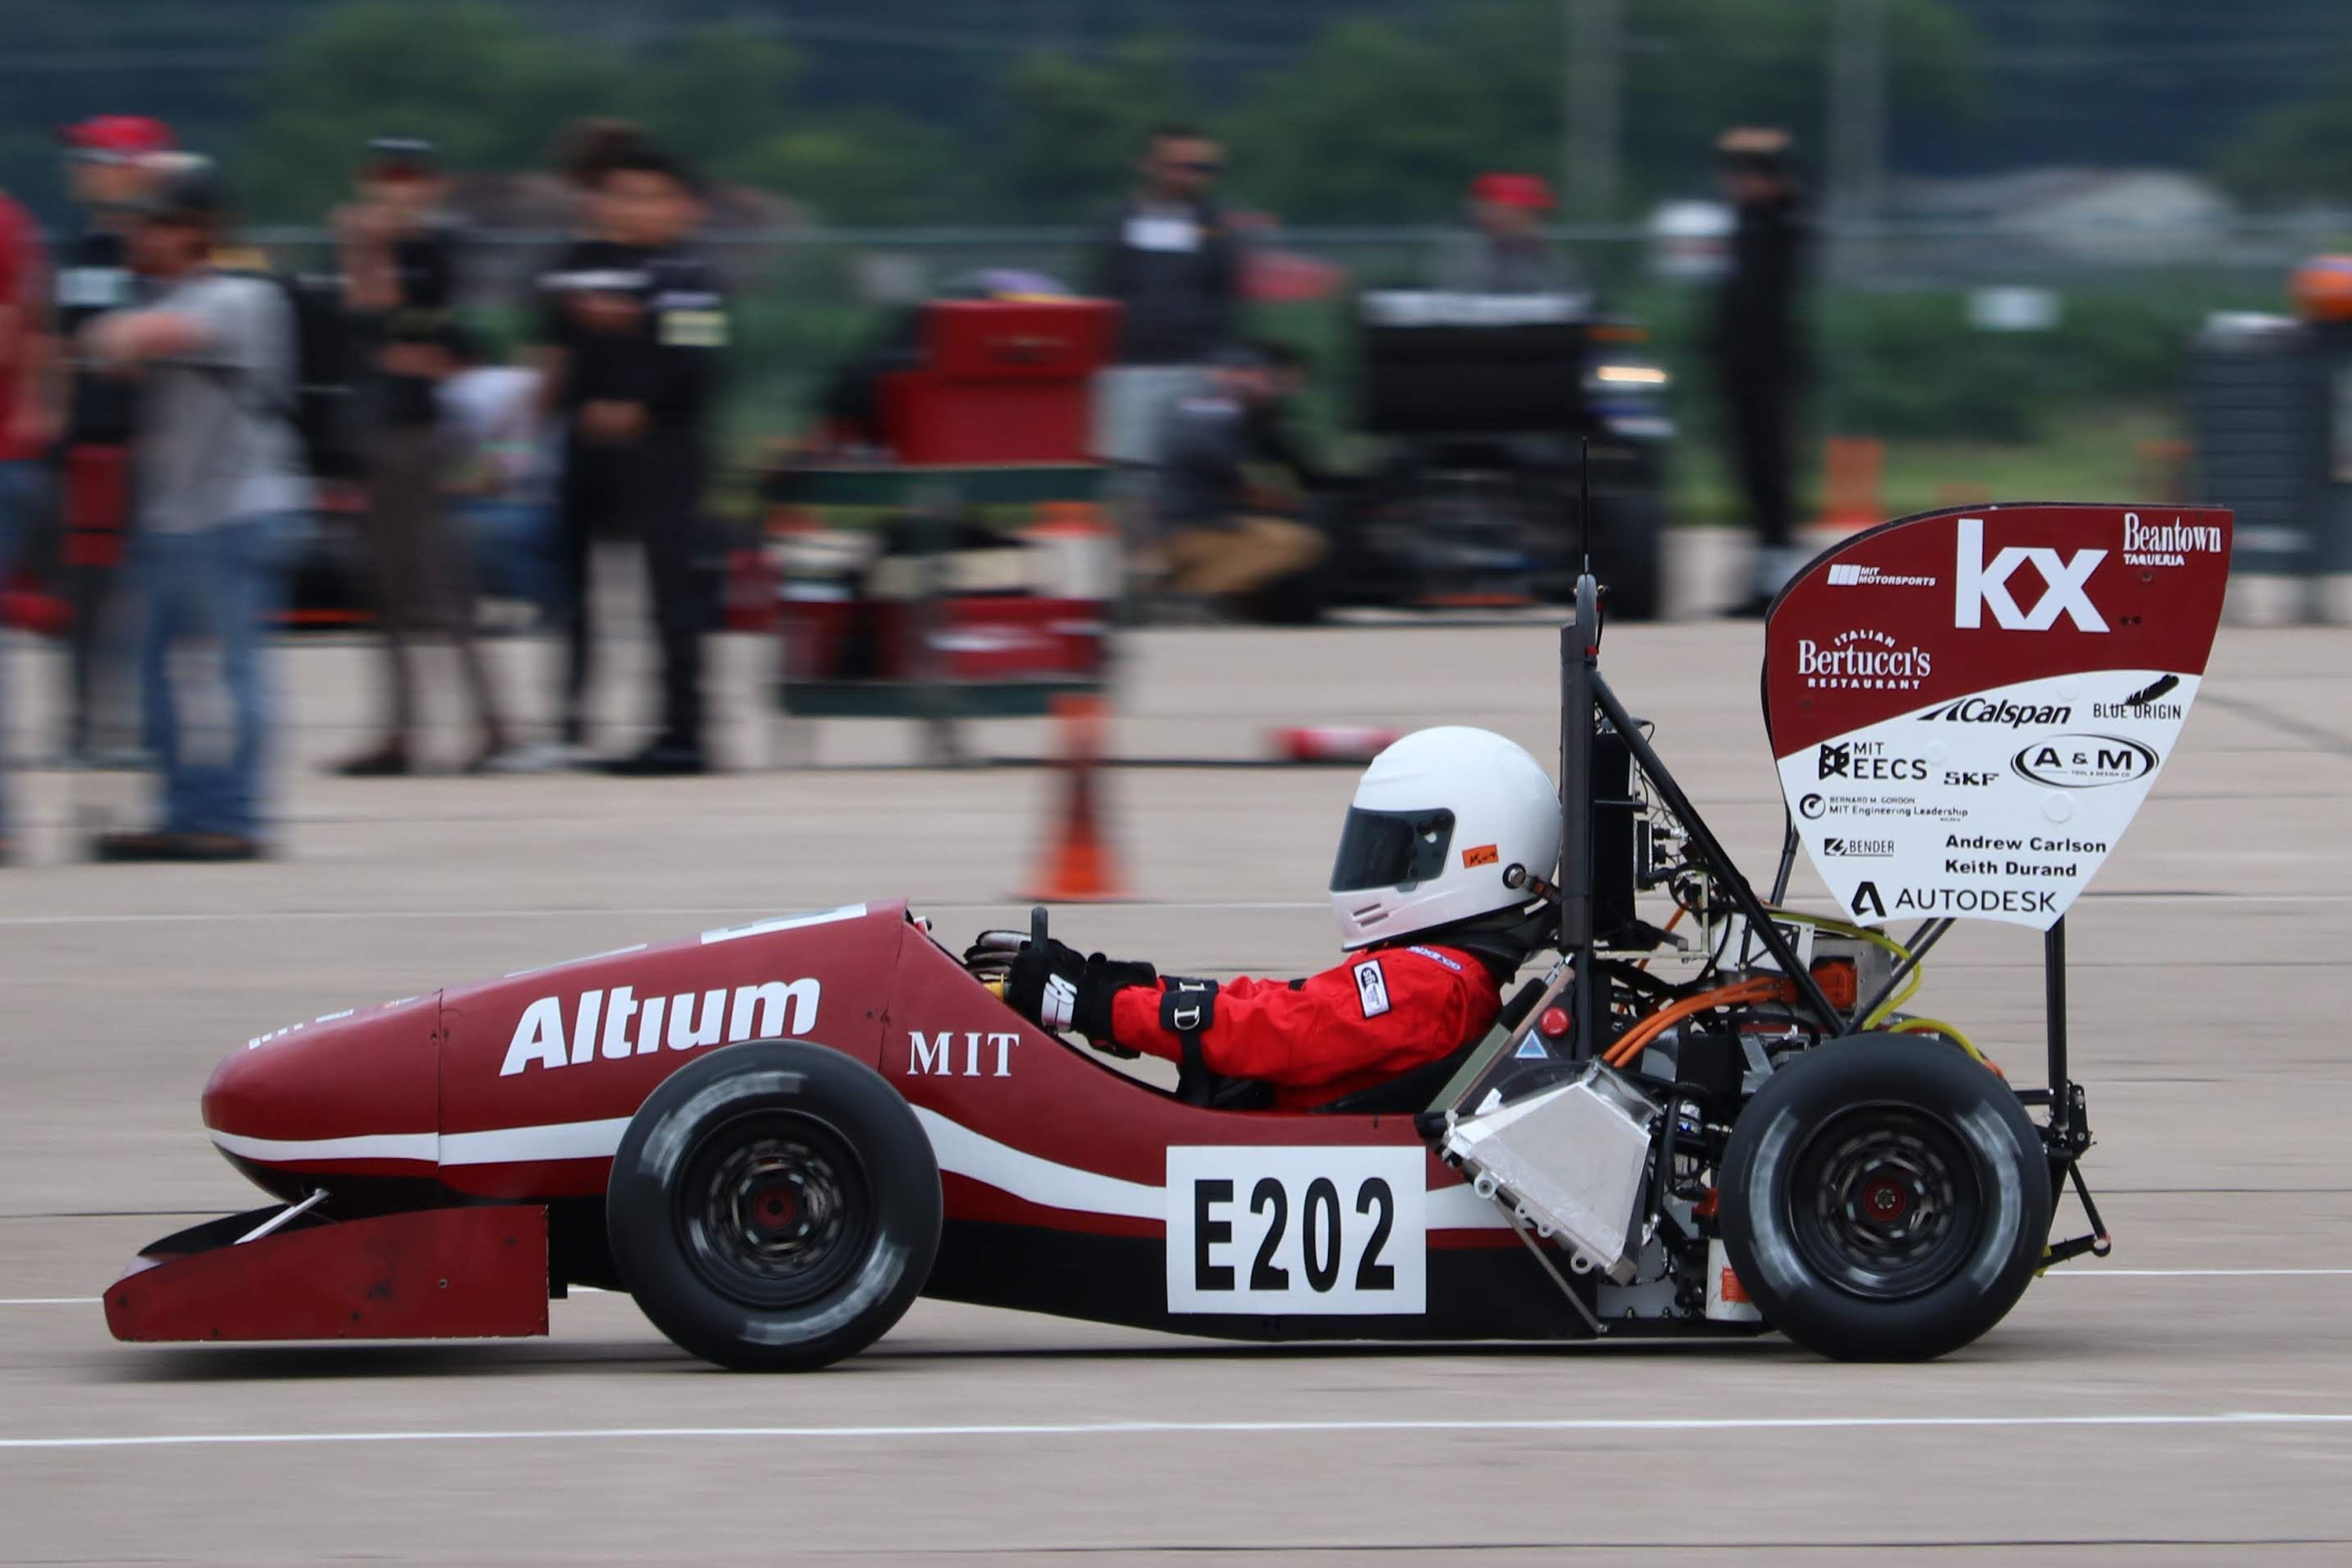 The MY18 vehicle competing in the accel event